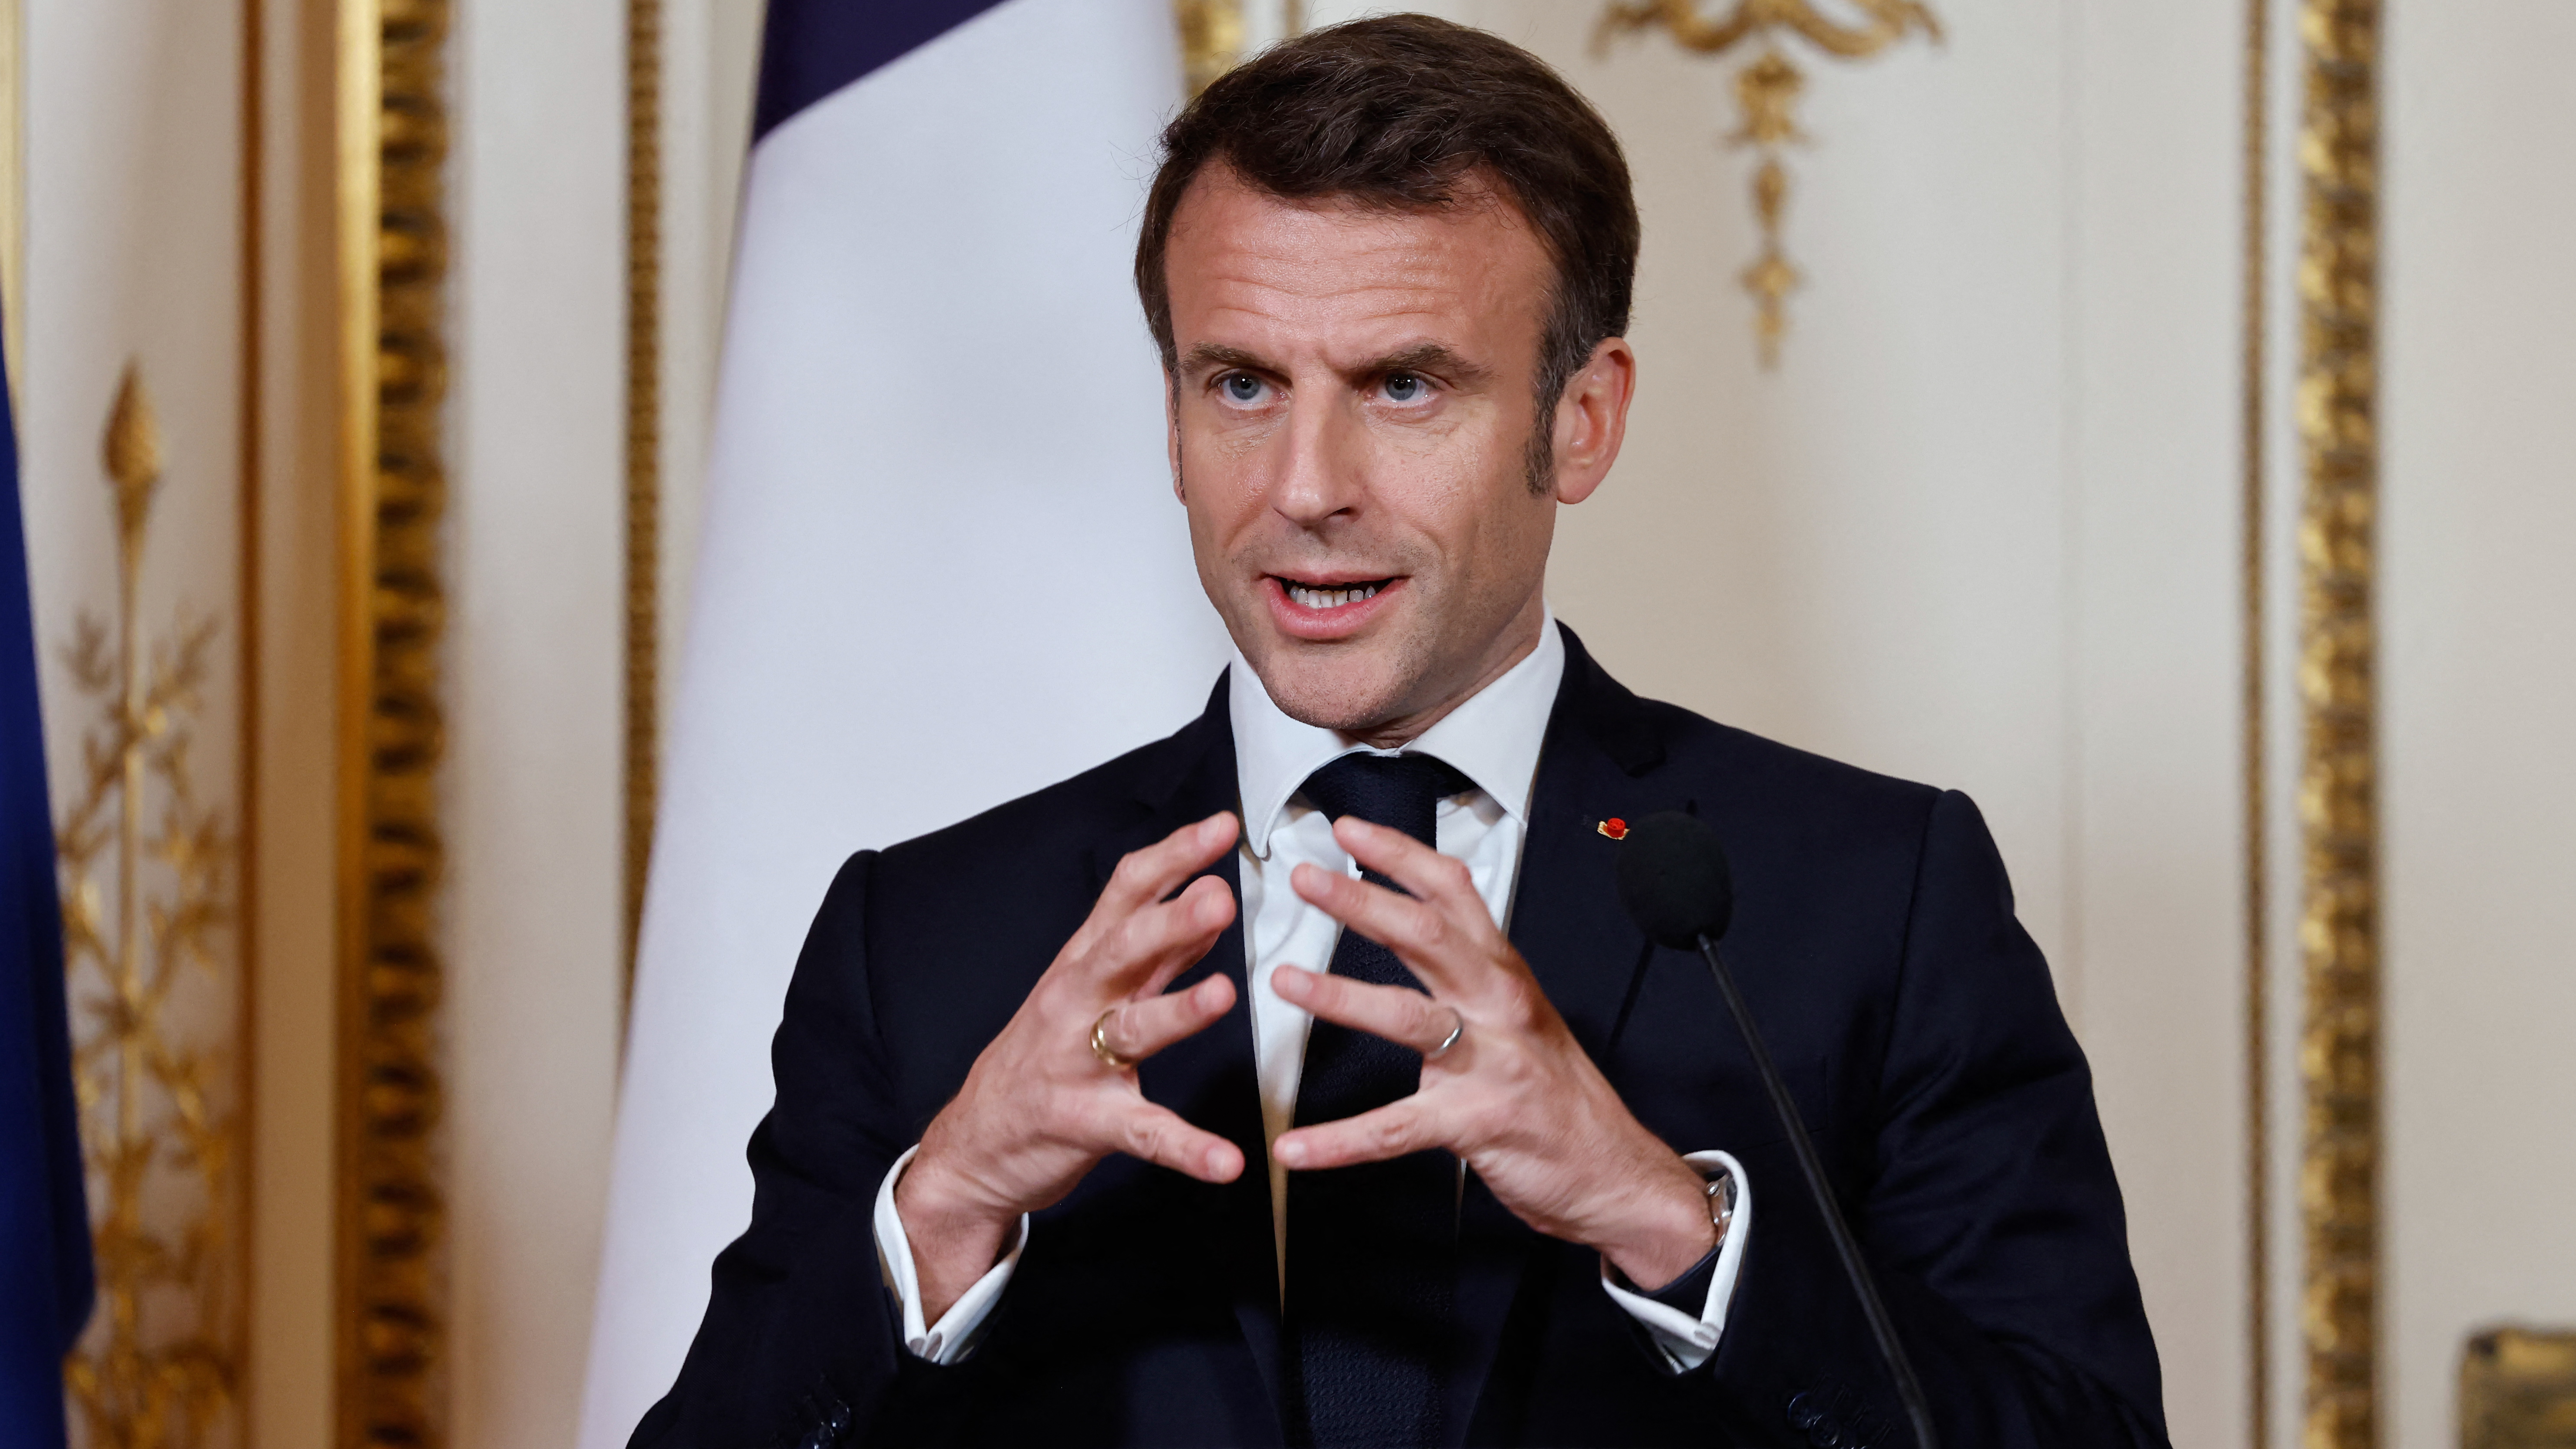 French President Emmanuel Macron's controversial pension reform has been given the green light by the French Constitutional Court./Ludovic Marin/AFP.

